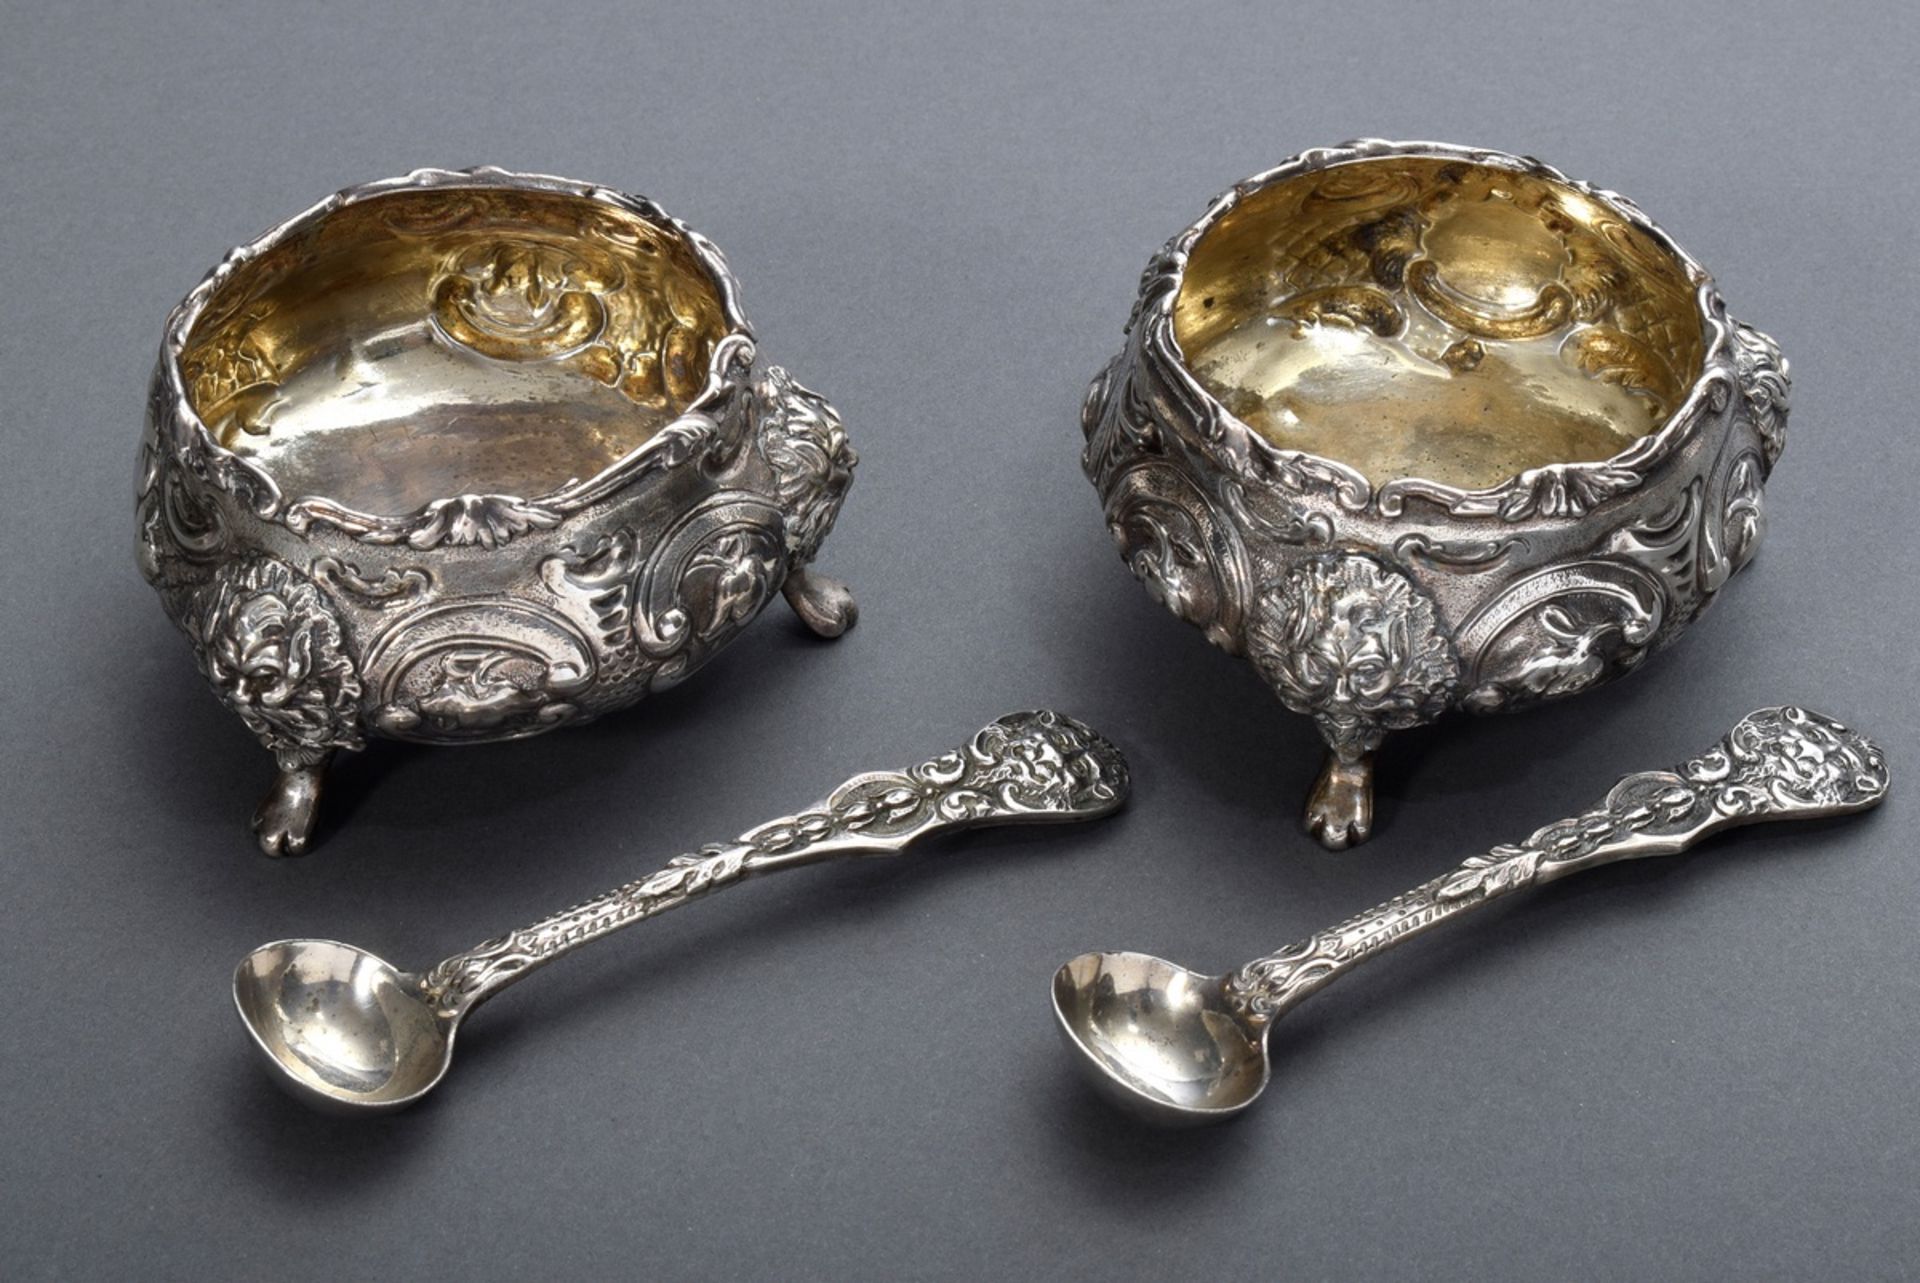 Pair of English salt cellars in rich relief on three feet with sculpted mascarons and supplemented 